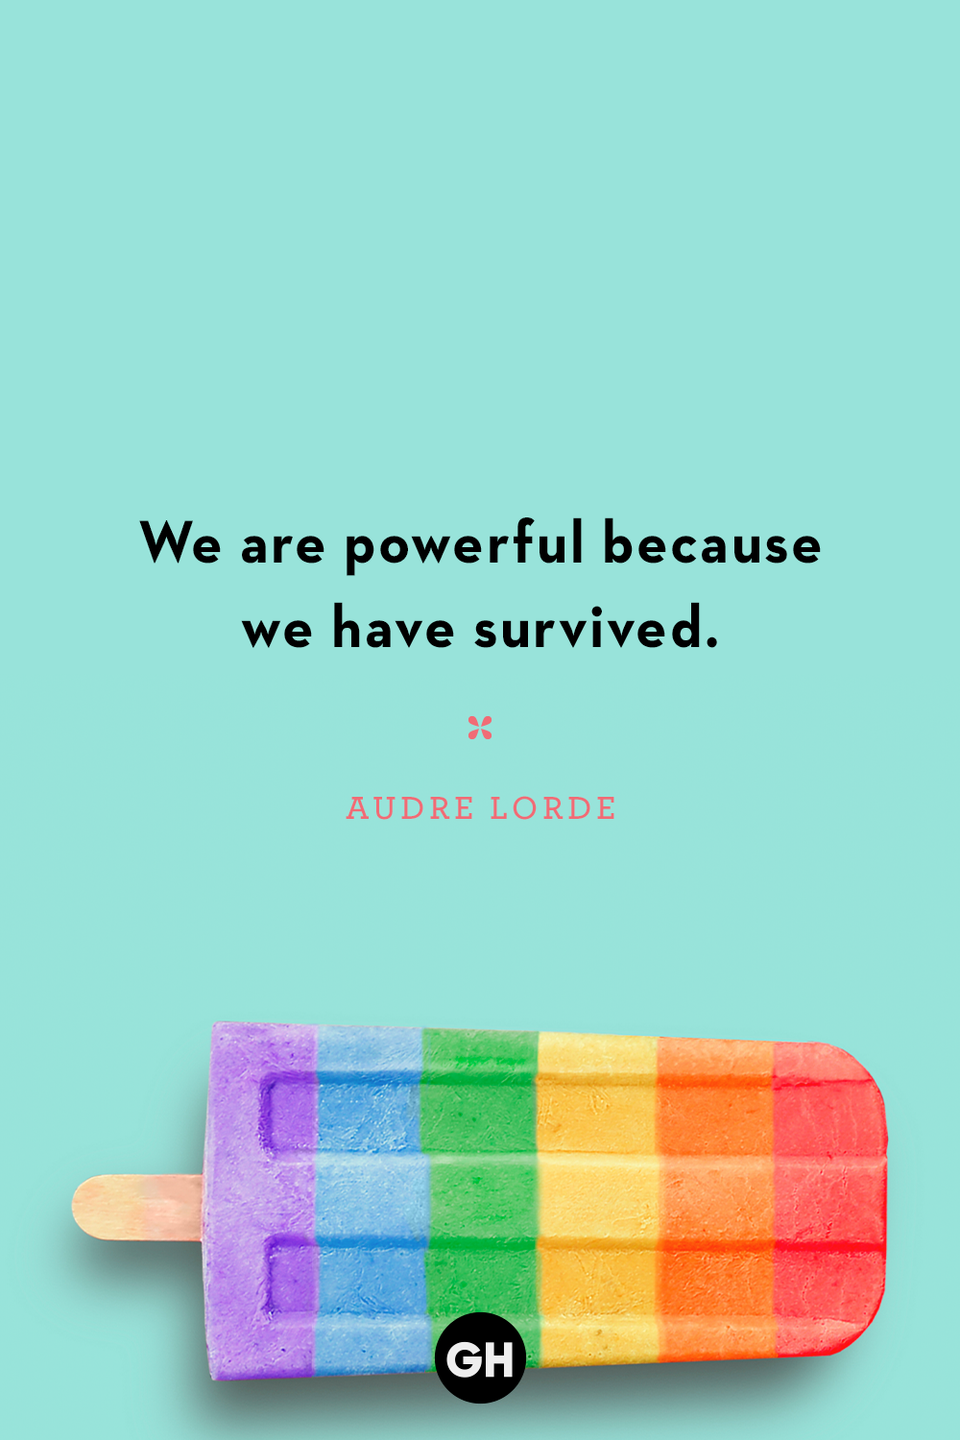 15) Audre Lorde